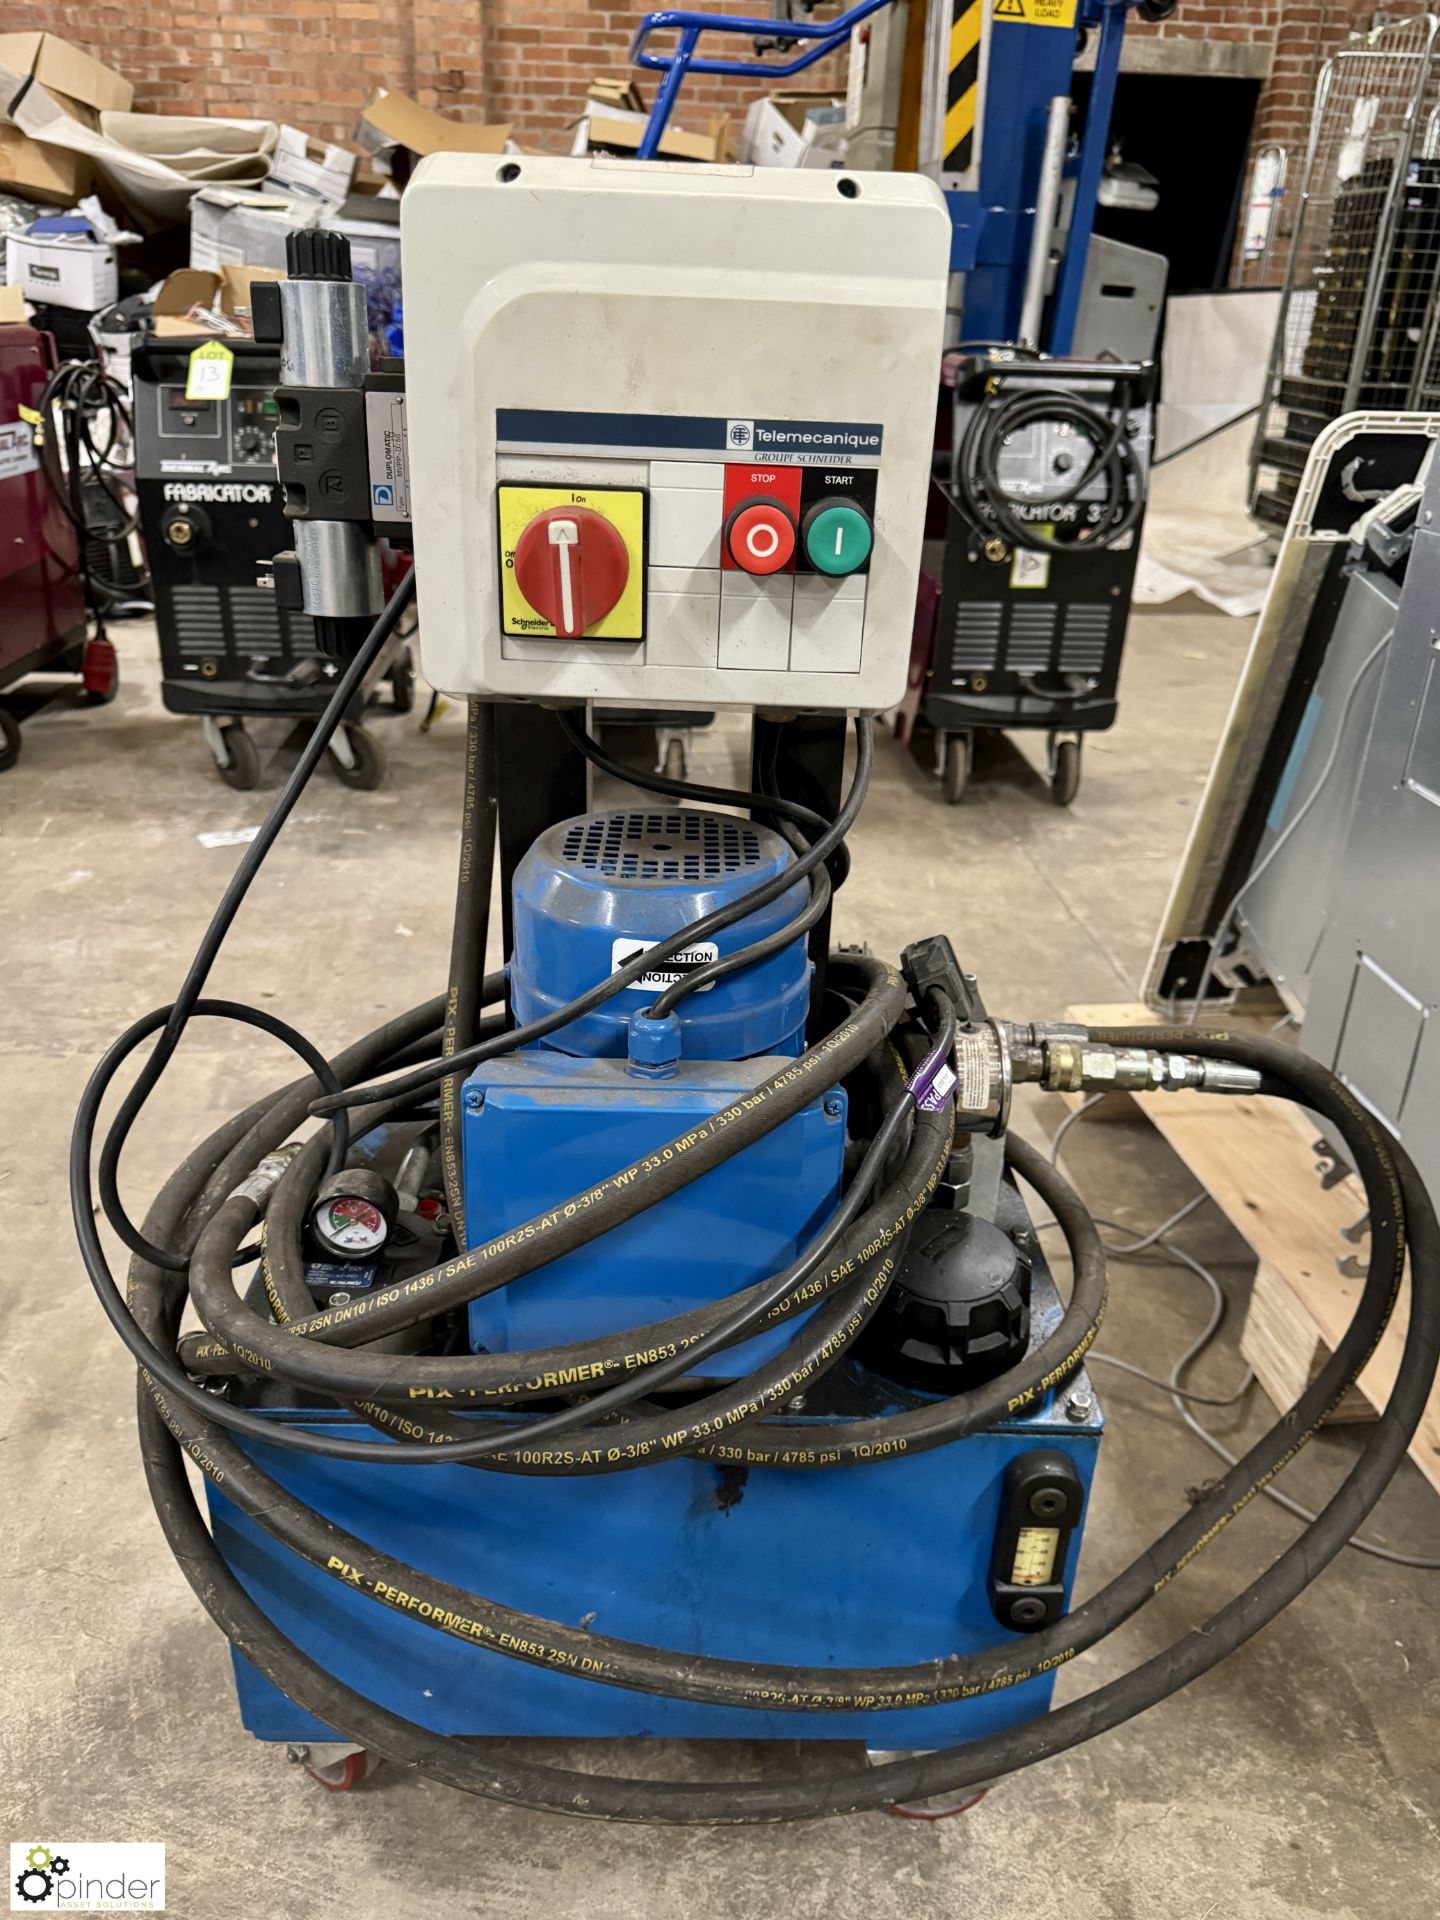 Mobile hydraulic Power Pack, 240volts